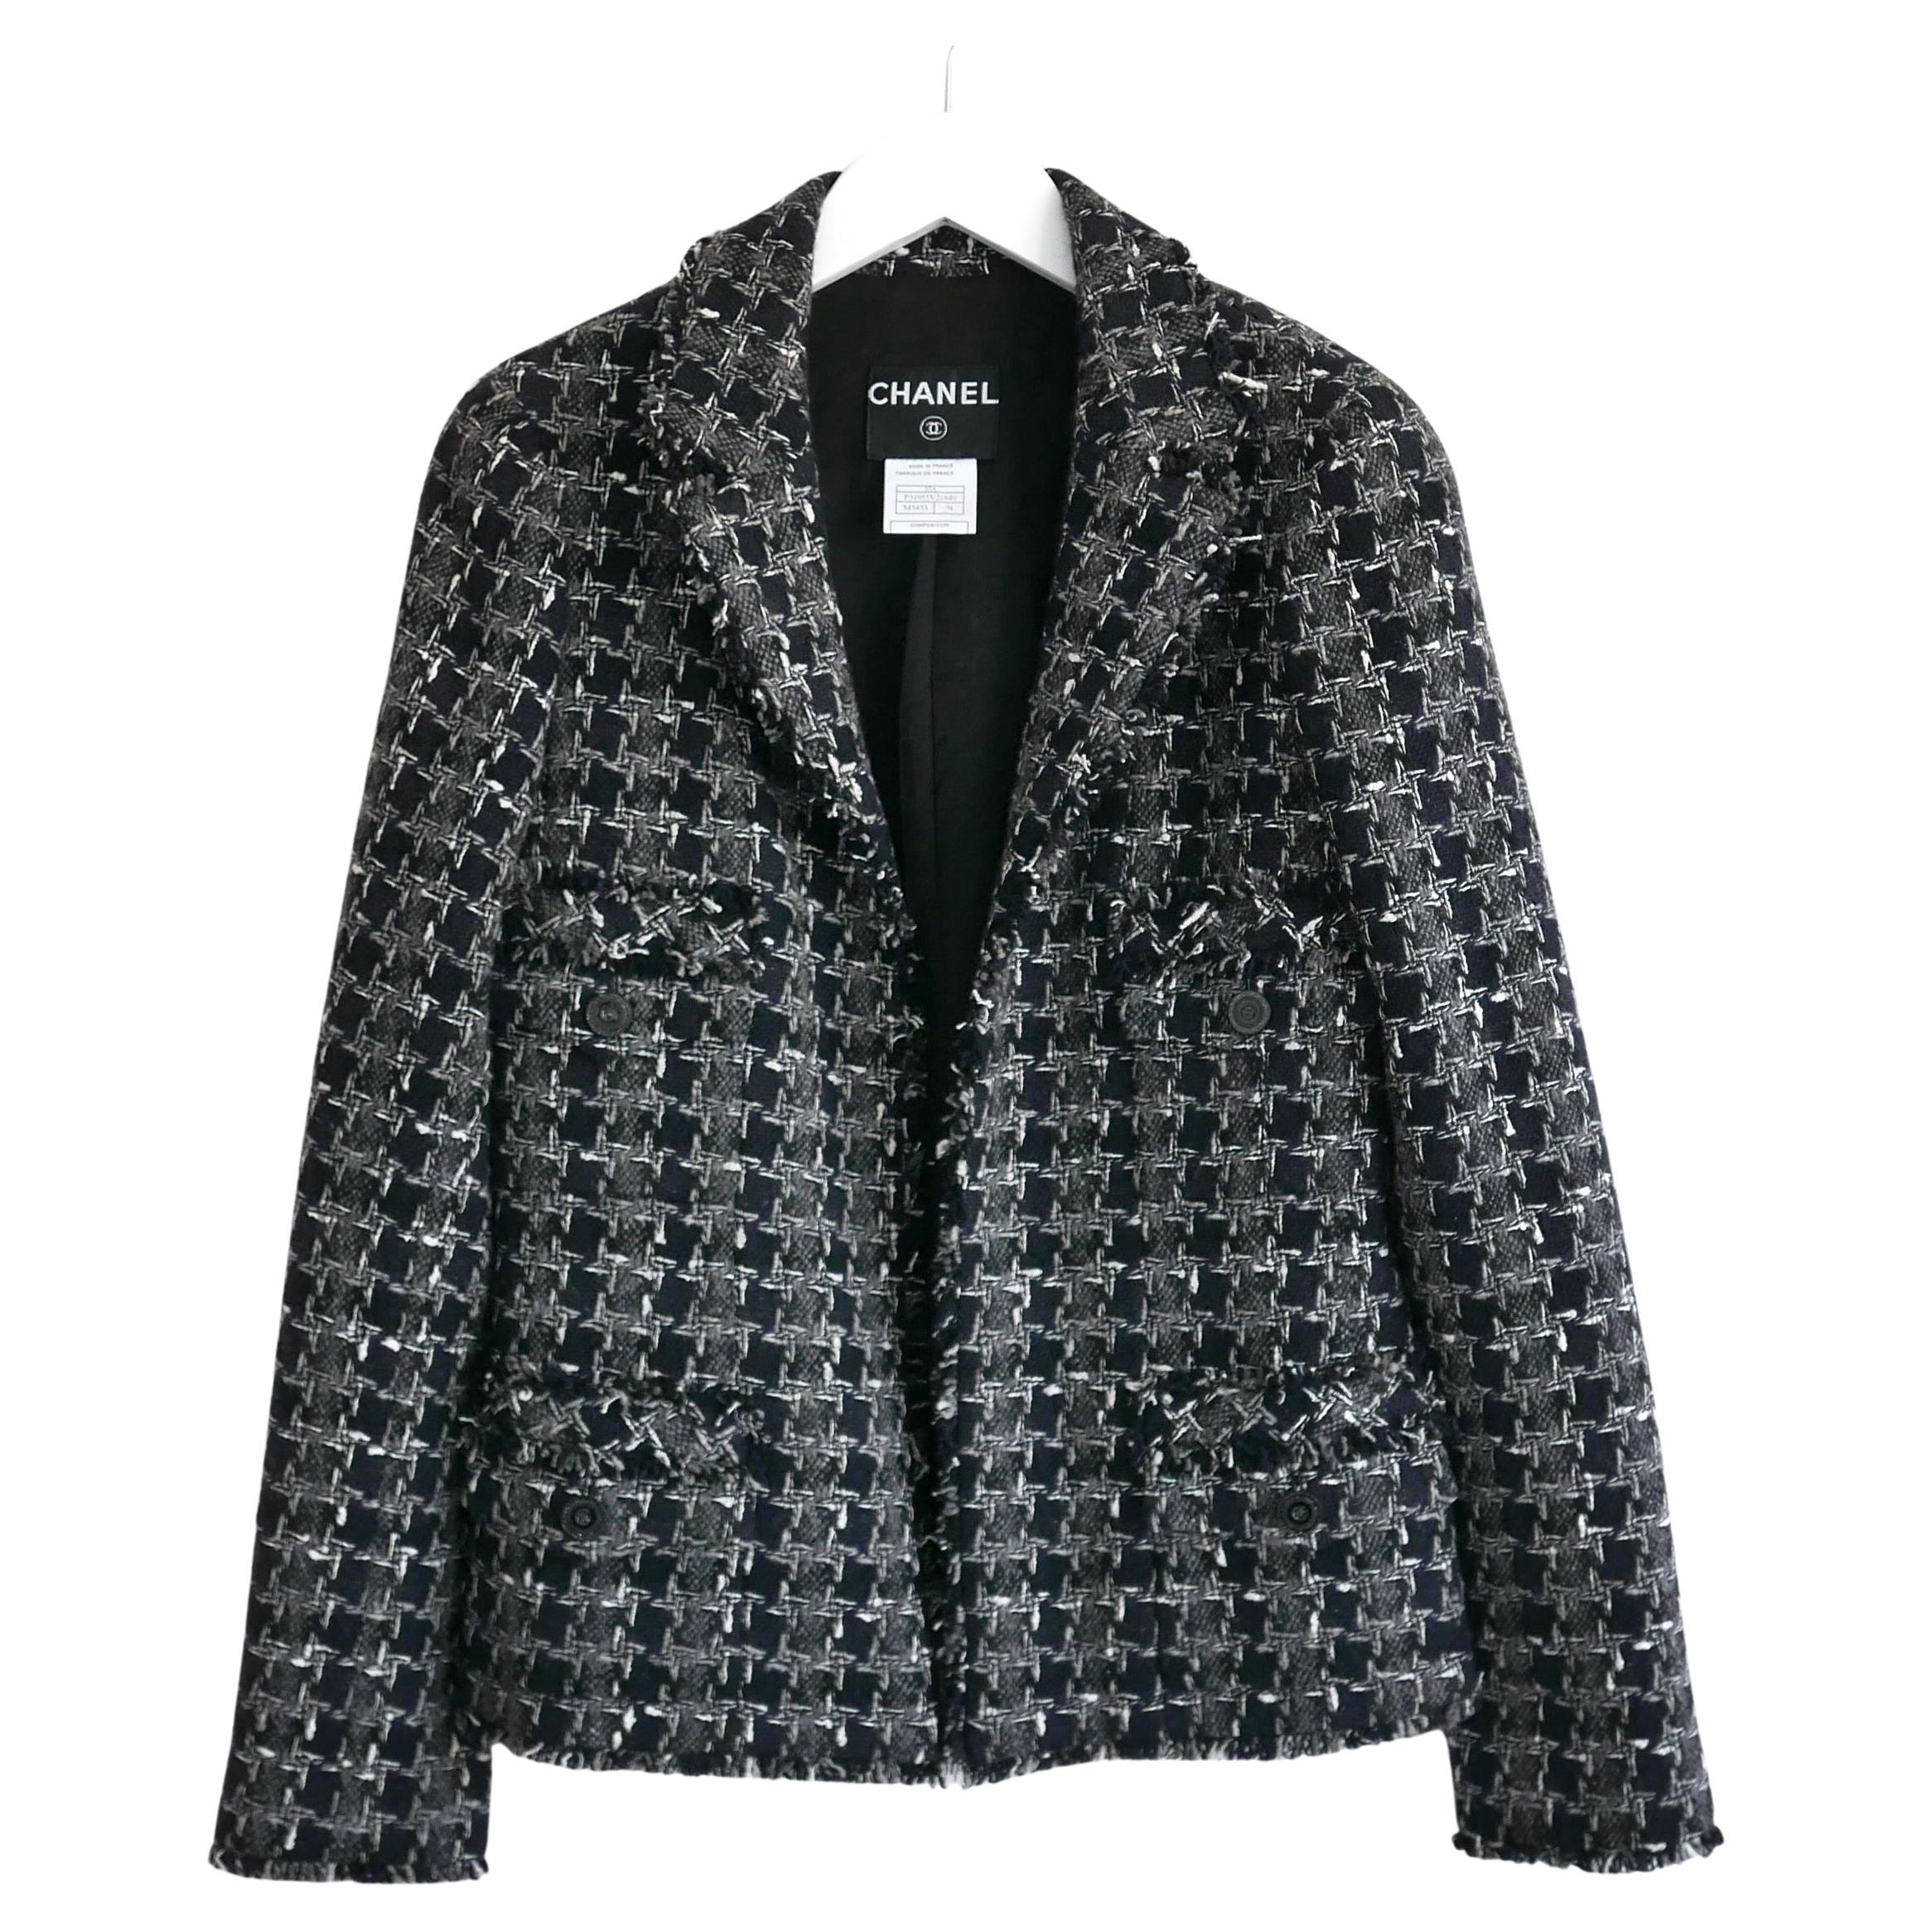 Chanel Fall 2007 07A Cashmere Houndstooth Tweed Jacket For Sale